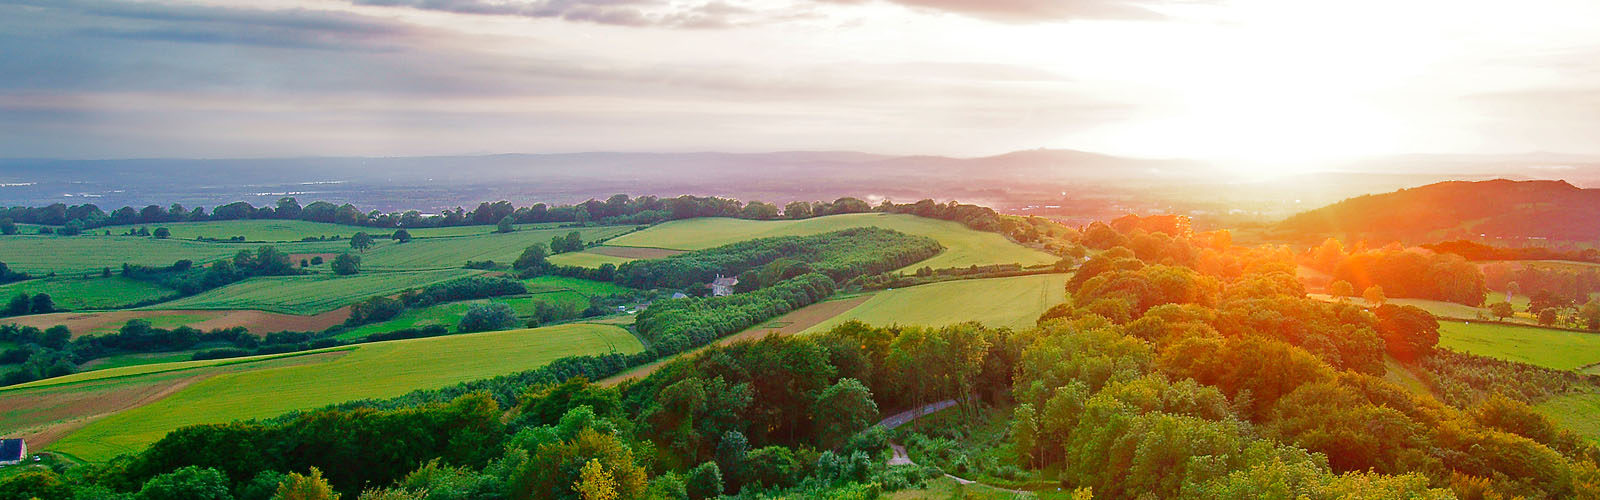 Sunset, with lens flare, in summer looking towards the Royal Forest of Dean from Painswick Beacon